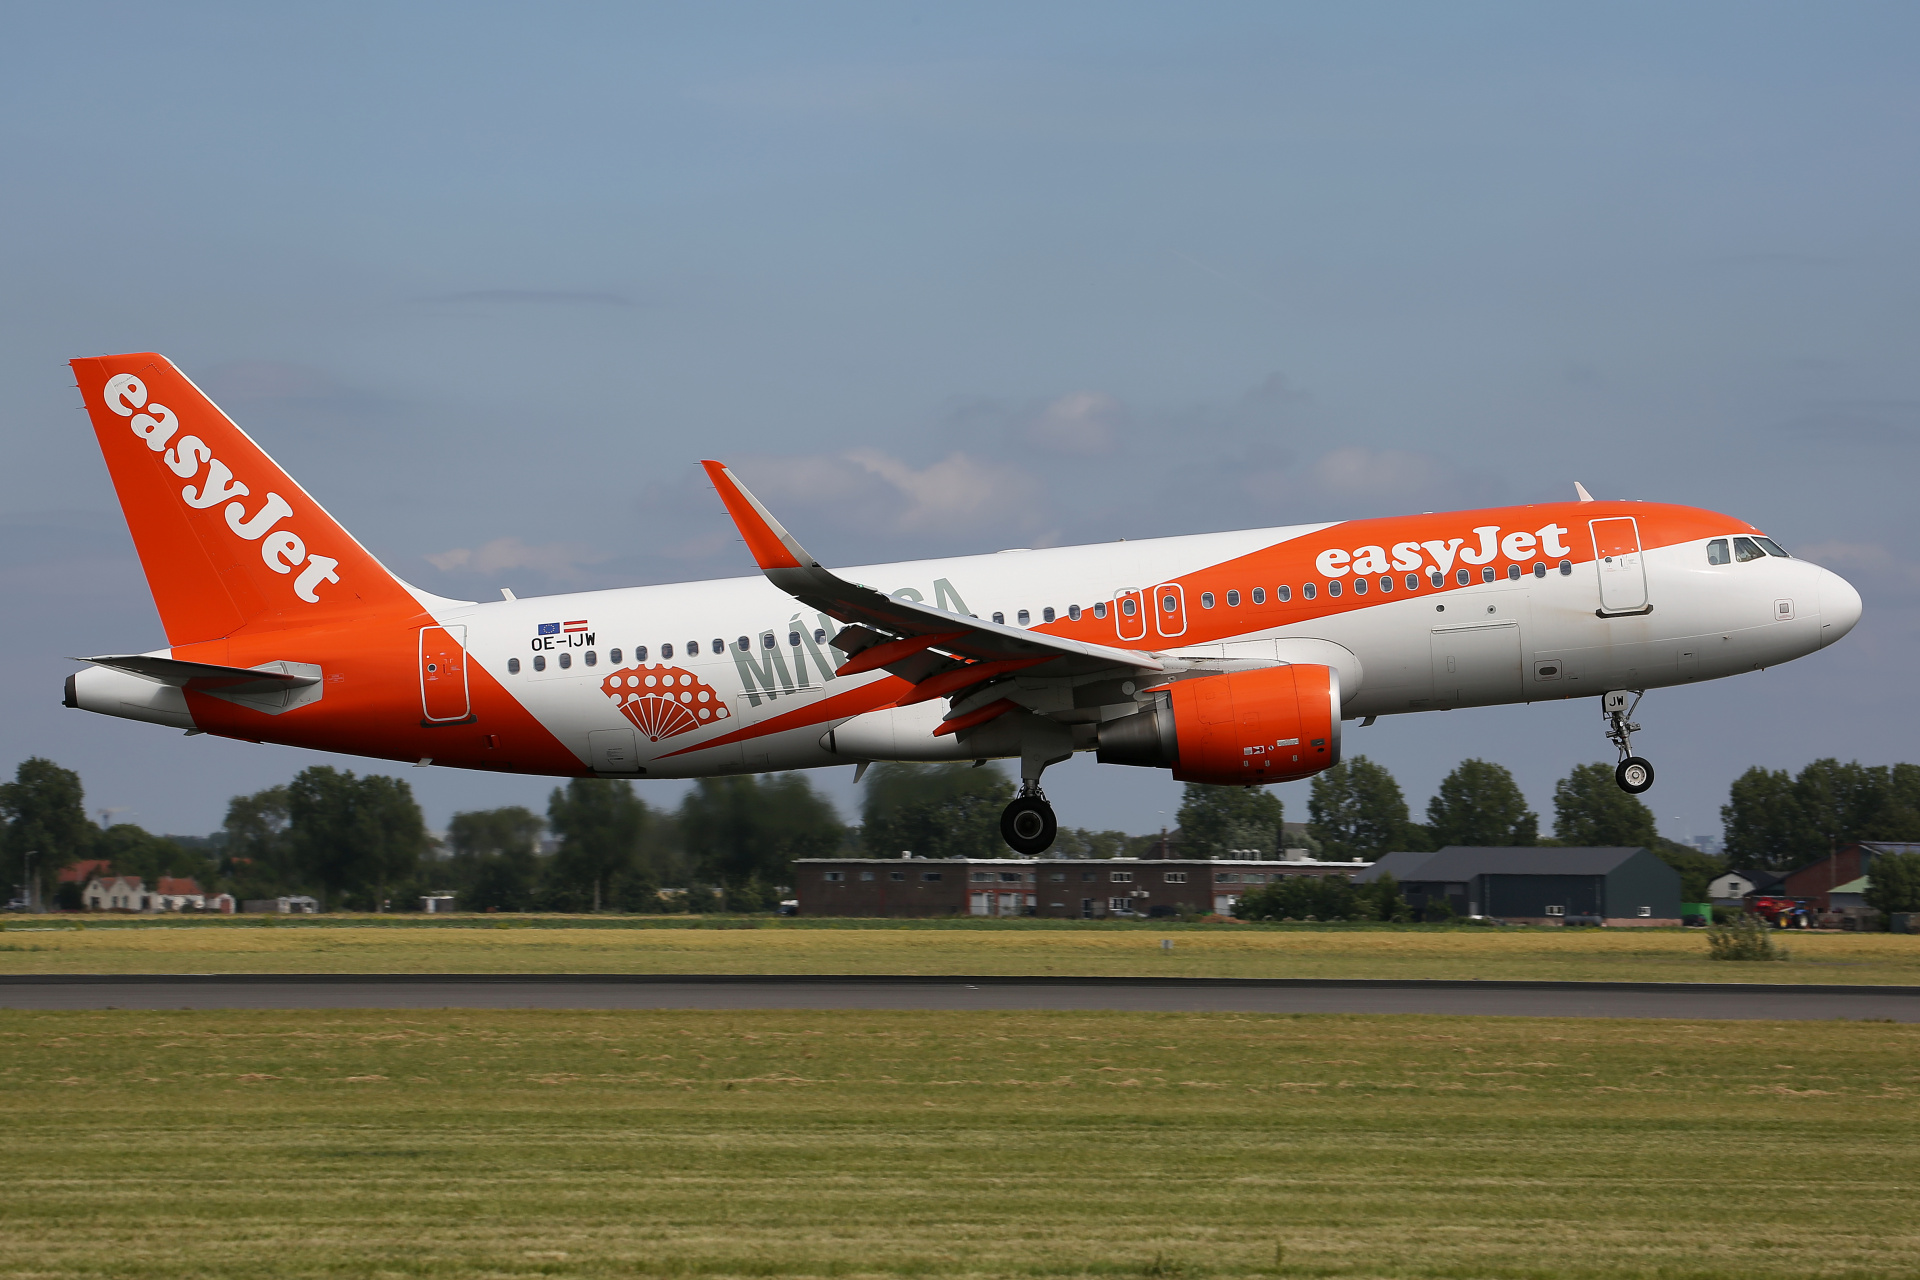 OE-IJW (Malaga livery) (Aircraft » Schiphol Spotting » Airbus A320-200 » EasyJet)